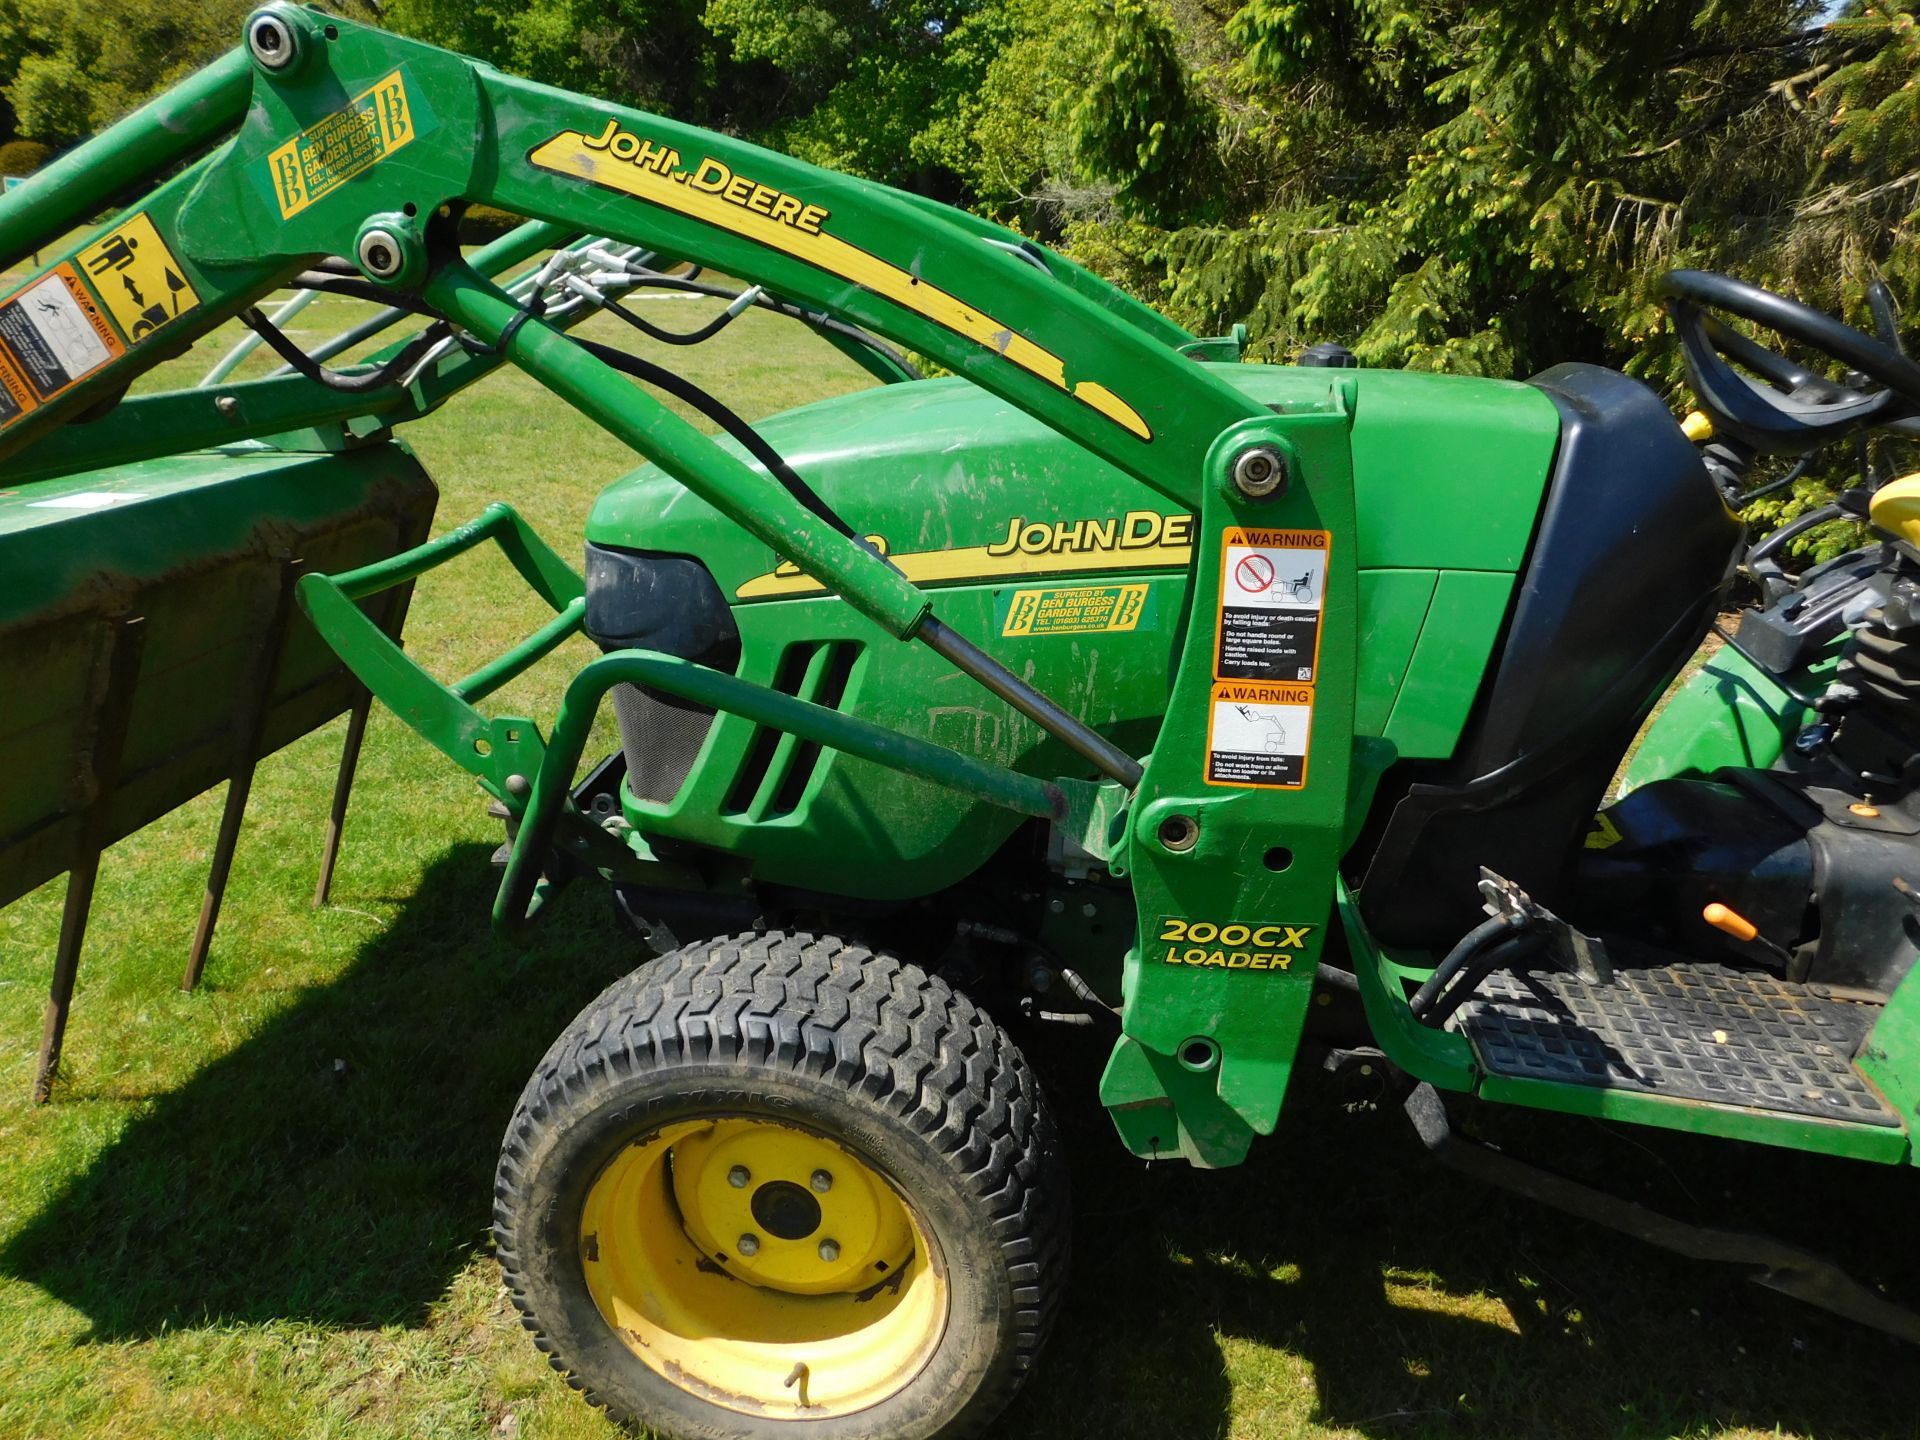 John Deere 2520 Compact Tractor, AU60 DDV, First Registered 6th January 2011, 770 Hours with Spare - Image 5 of 10